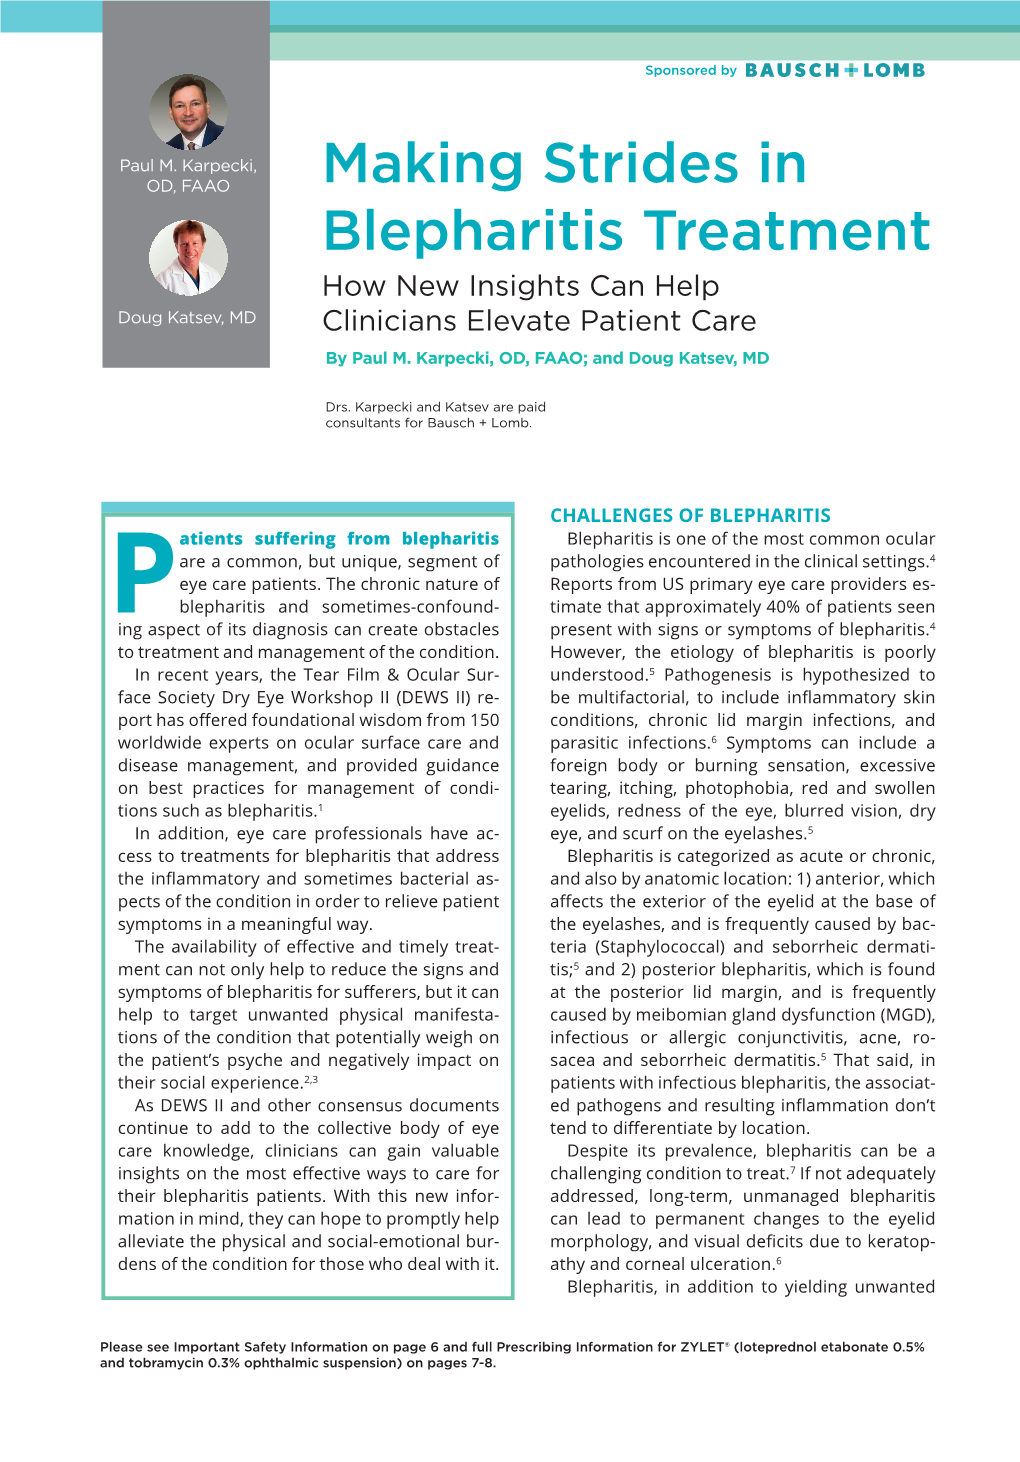 Making Strides in Blepharitis Treatment How New Insights Can Help Doug Katsev, MD Clinicians Elevate Patient Care by Paul M